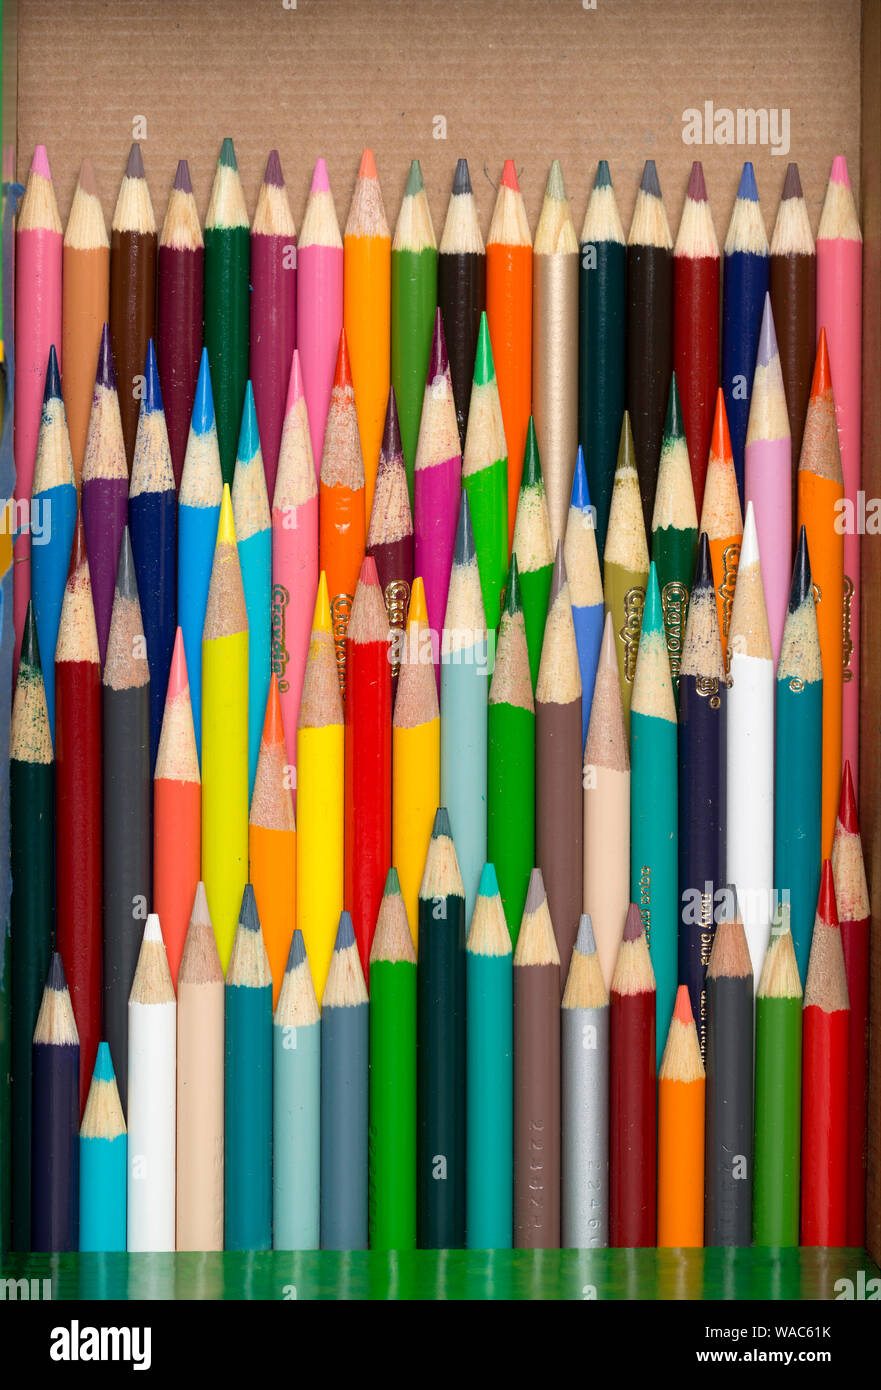 A box of used color pencils at various lengths Stock Photo